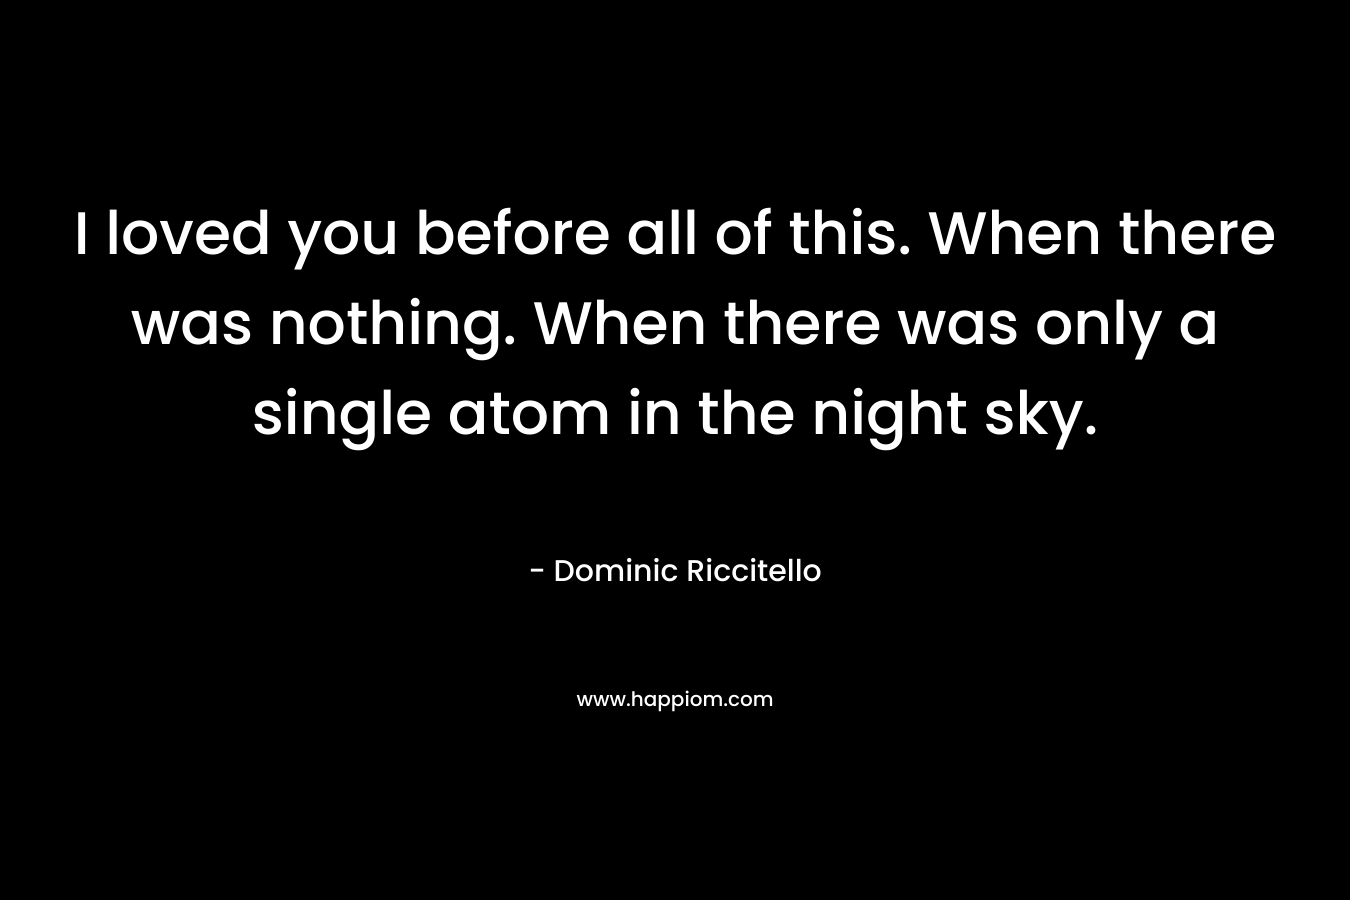 I loved you before all of this. When there was nothing. When there was only a single atom in the night sky. – Dominic Riccitello